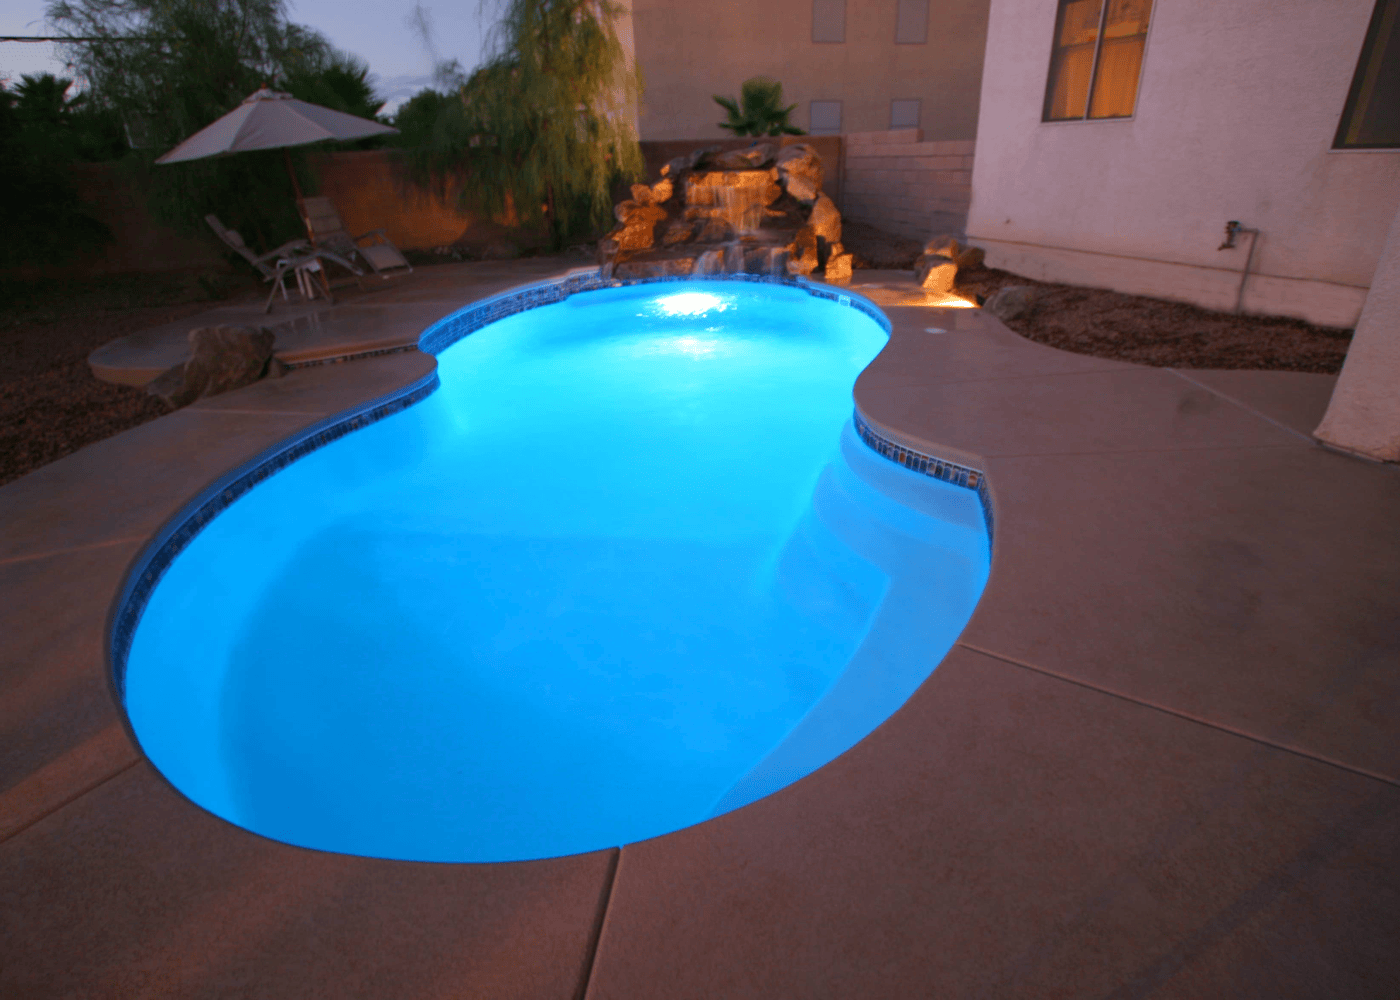 A filled in-ground swimming pool illuminated in the evening with the pool lights on. The clear blue water reflects the ambient lighting, creating a tranquil and inviting atmosphere.